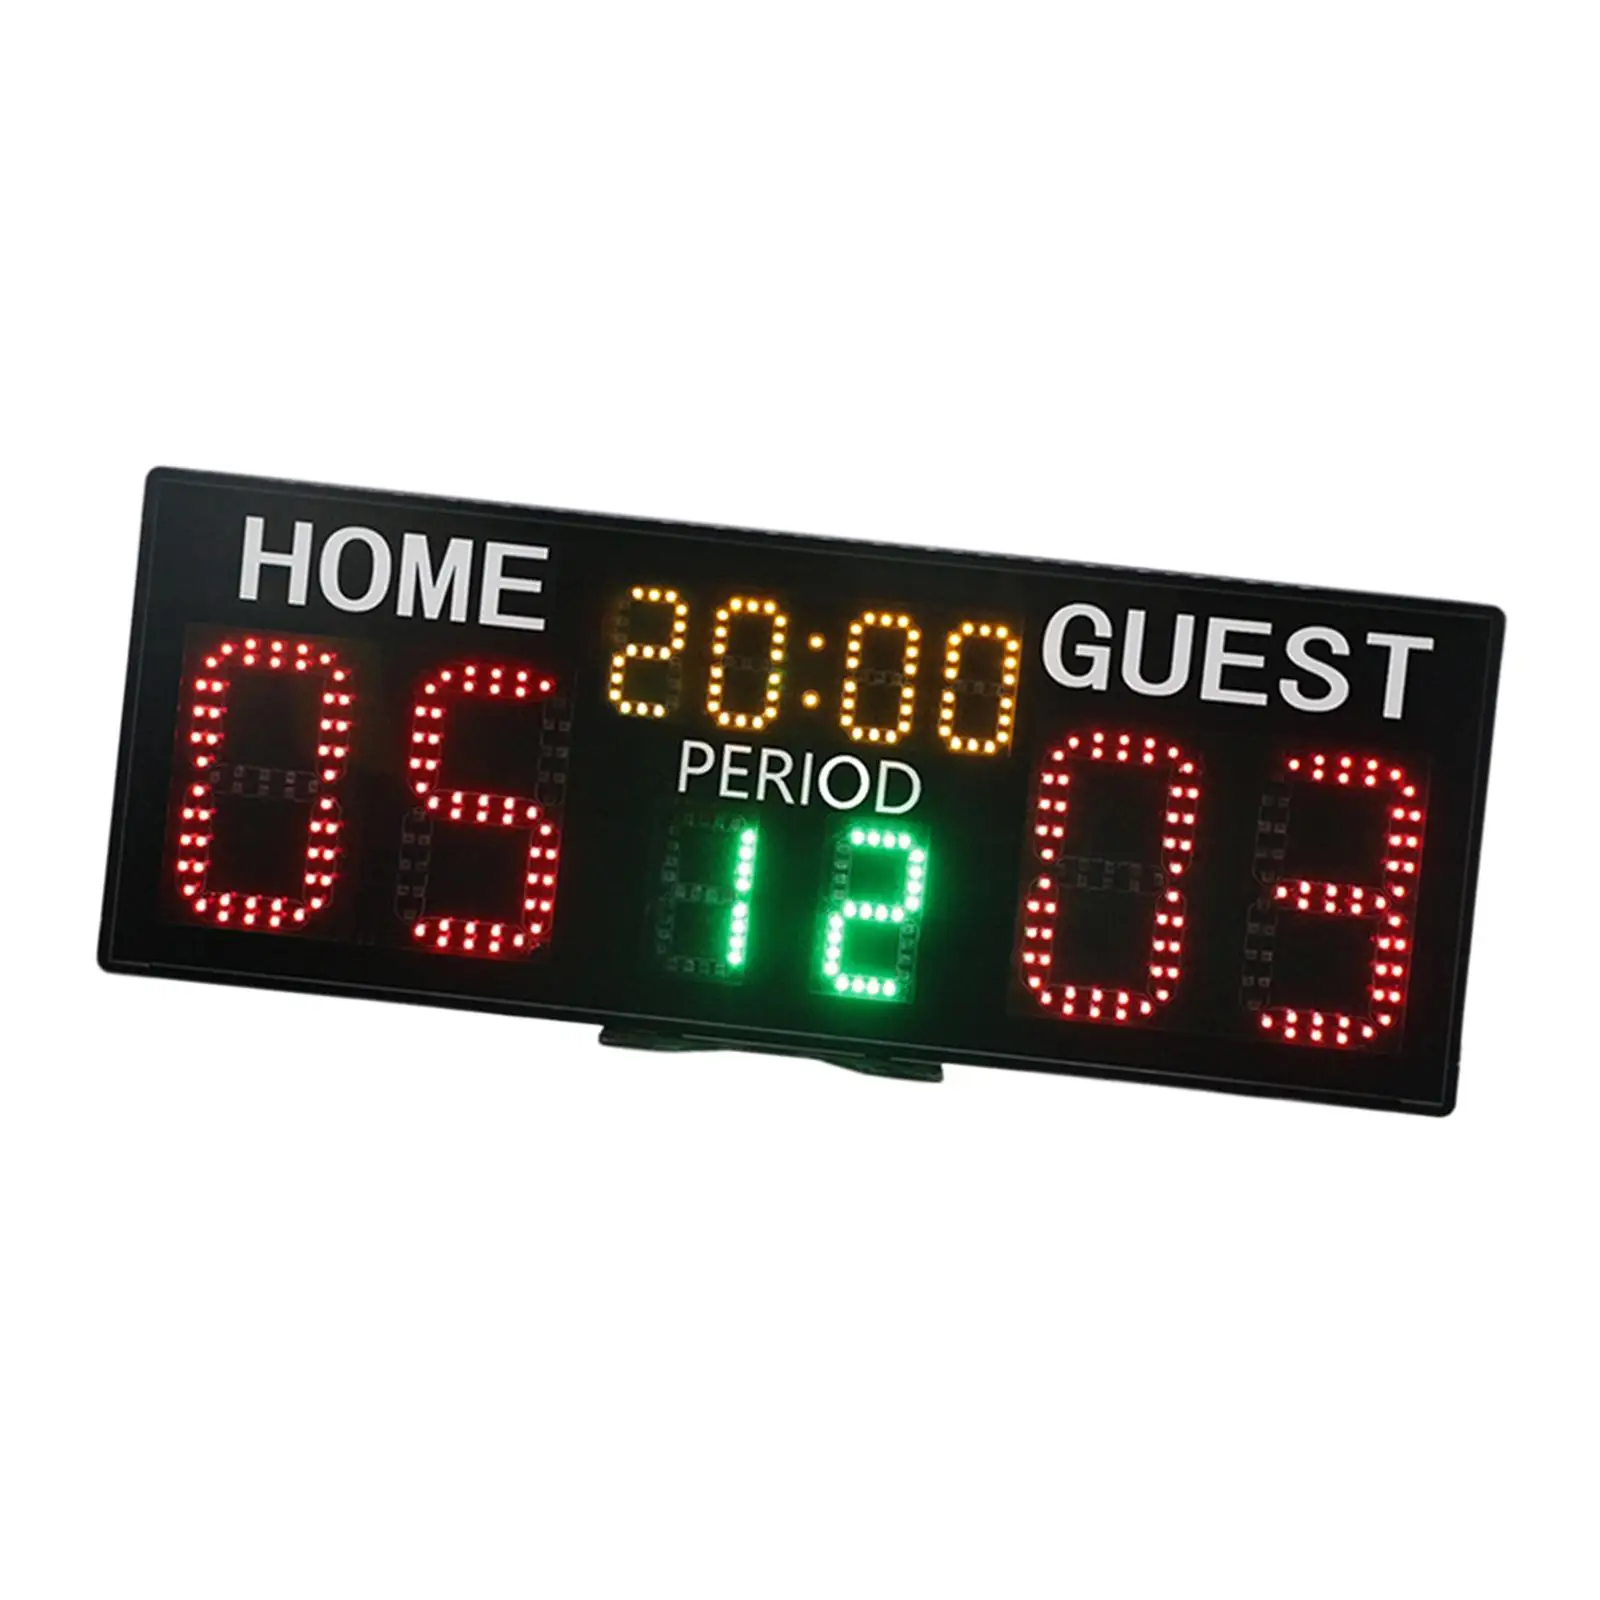 Tennis Score Keeper Tabletop Professional Countdown Timer & Score Electronic Scoreboard for Soccer Baseball Outdoor Sports Games